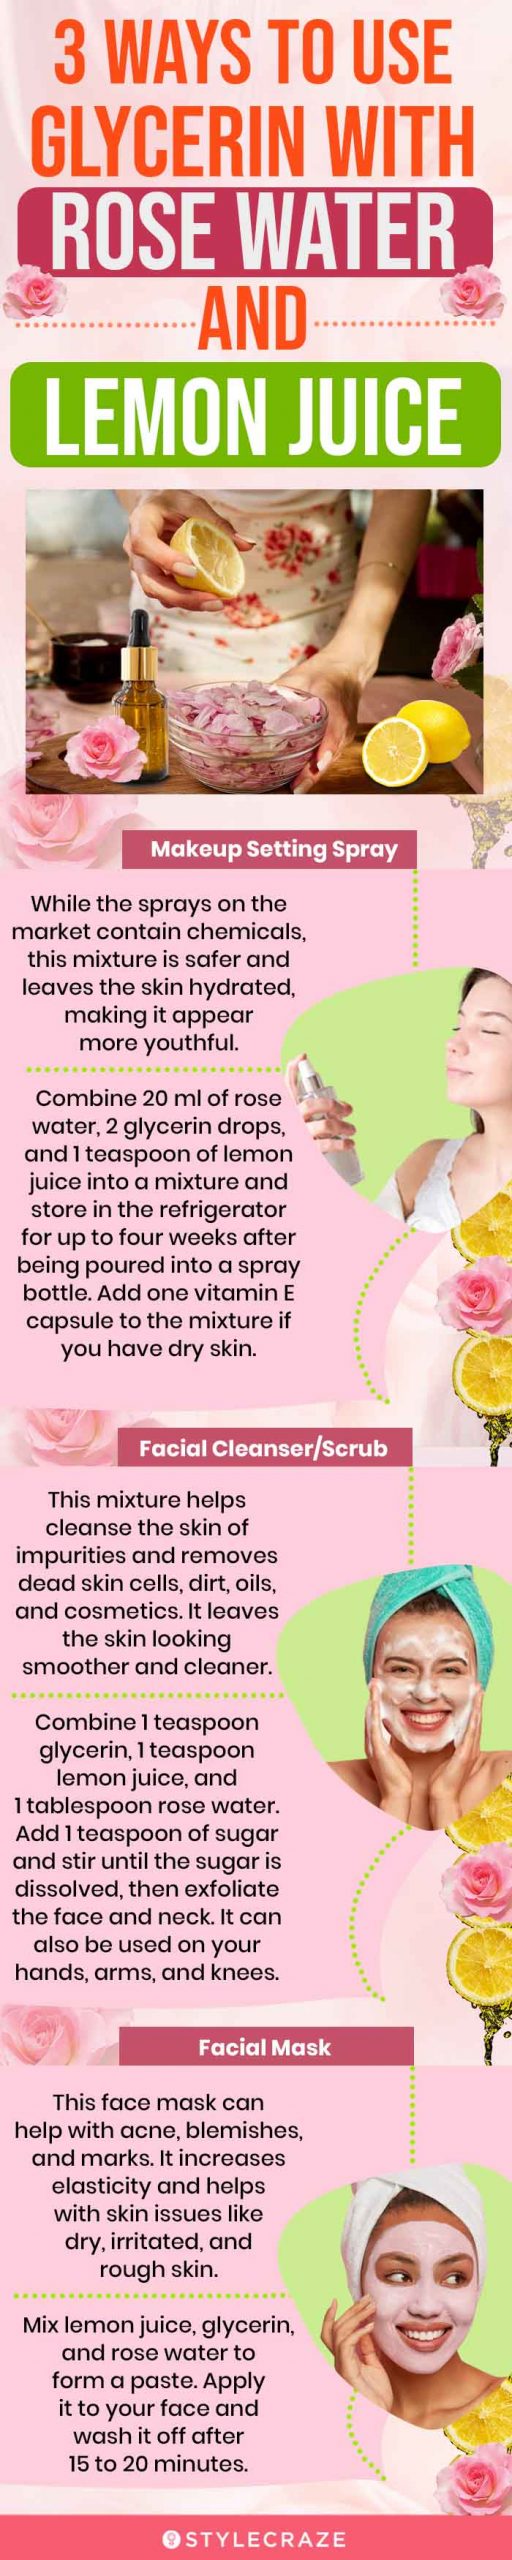 3 ways to use glycerin with rose water and lemon juice (infographic)